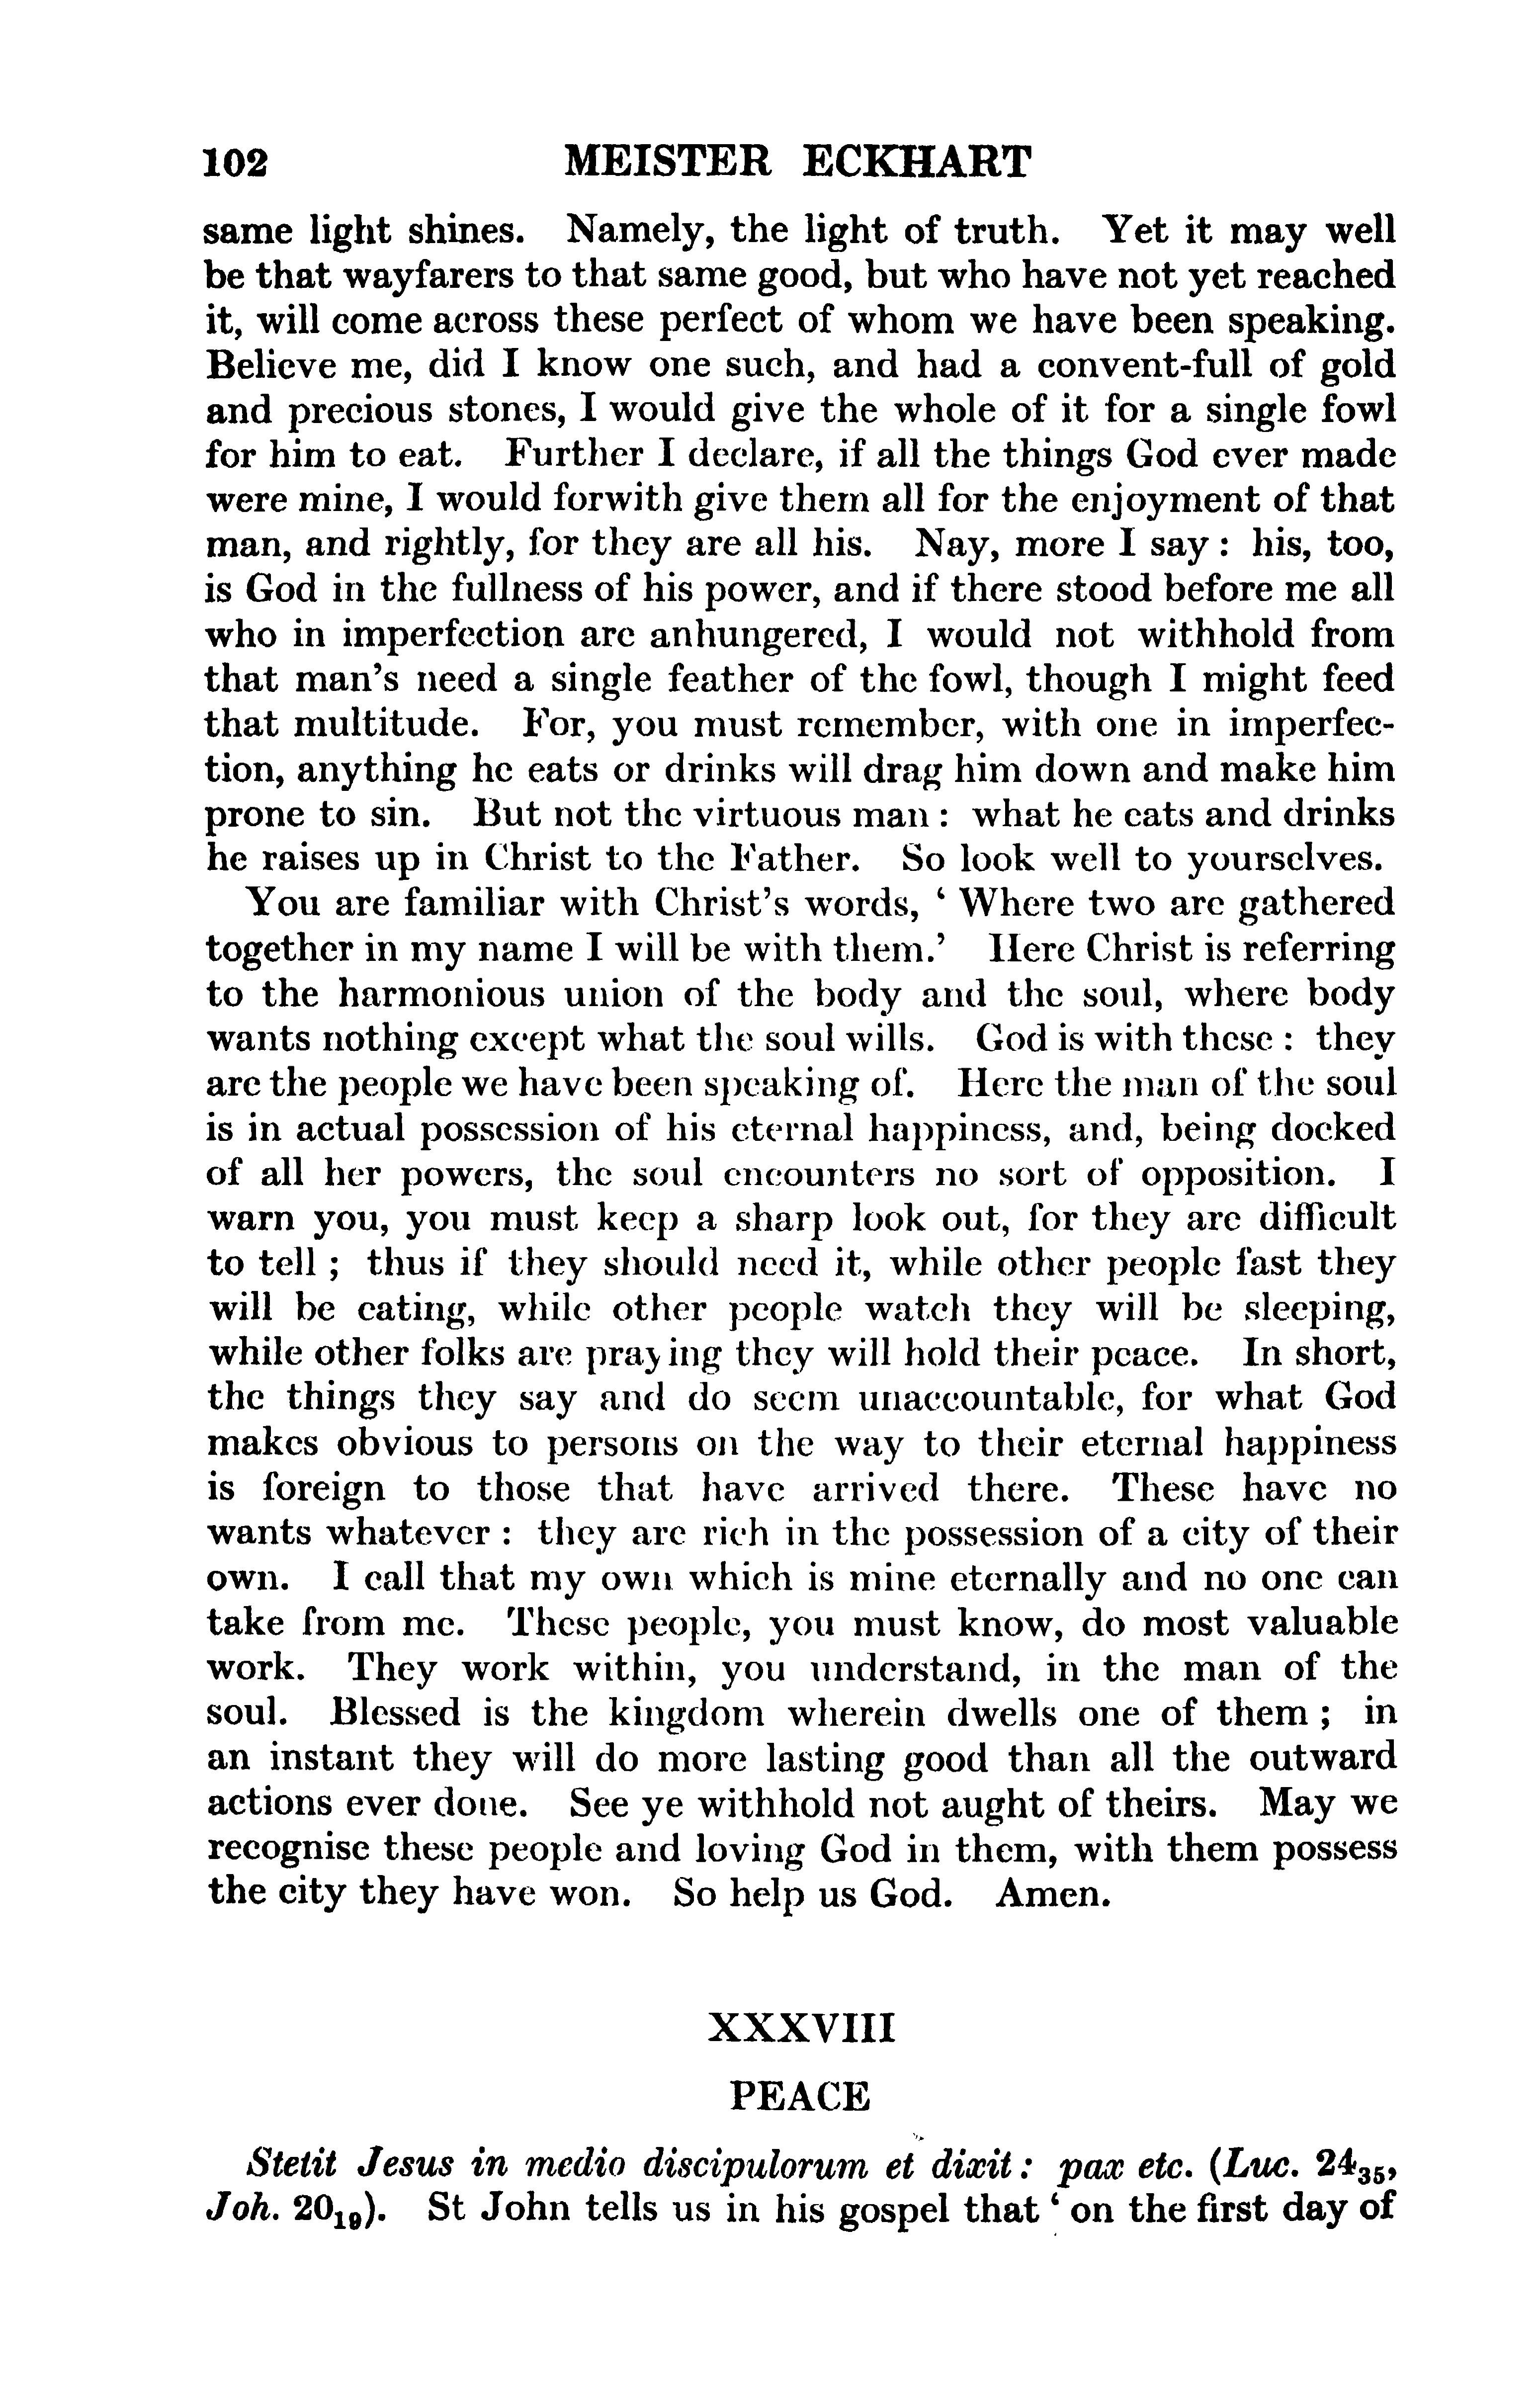 Image of page 0126